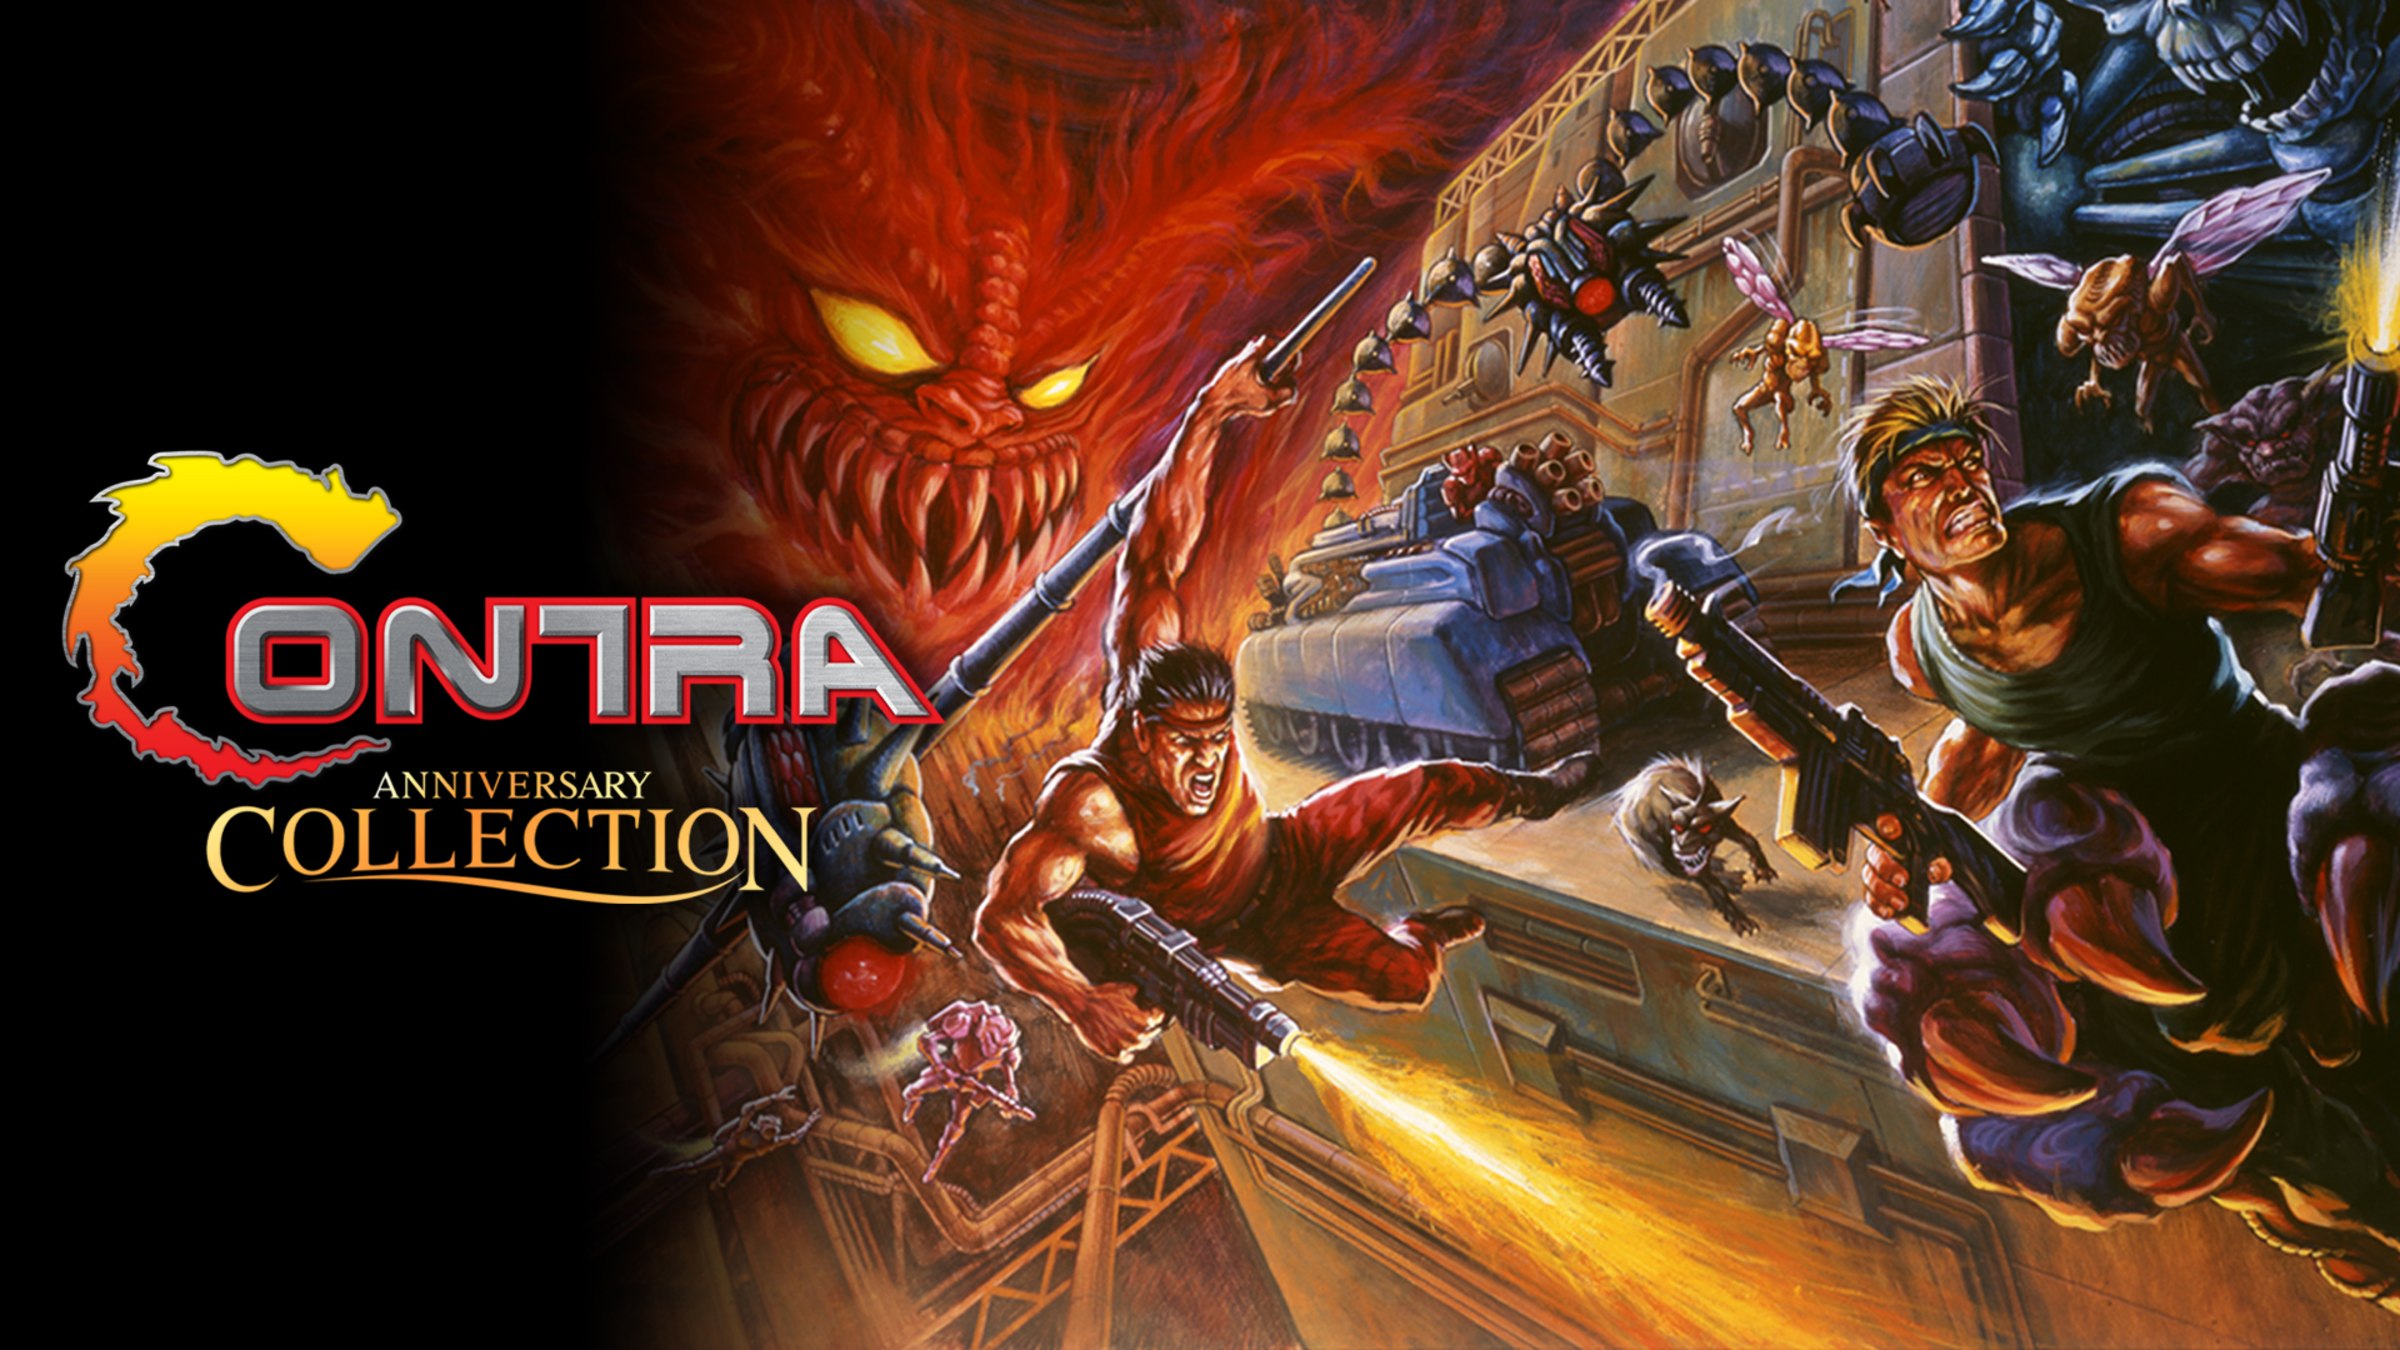 Contra Anniversary Collection for Nintendo Switch